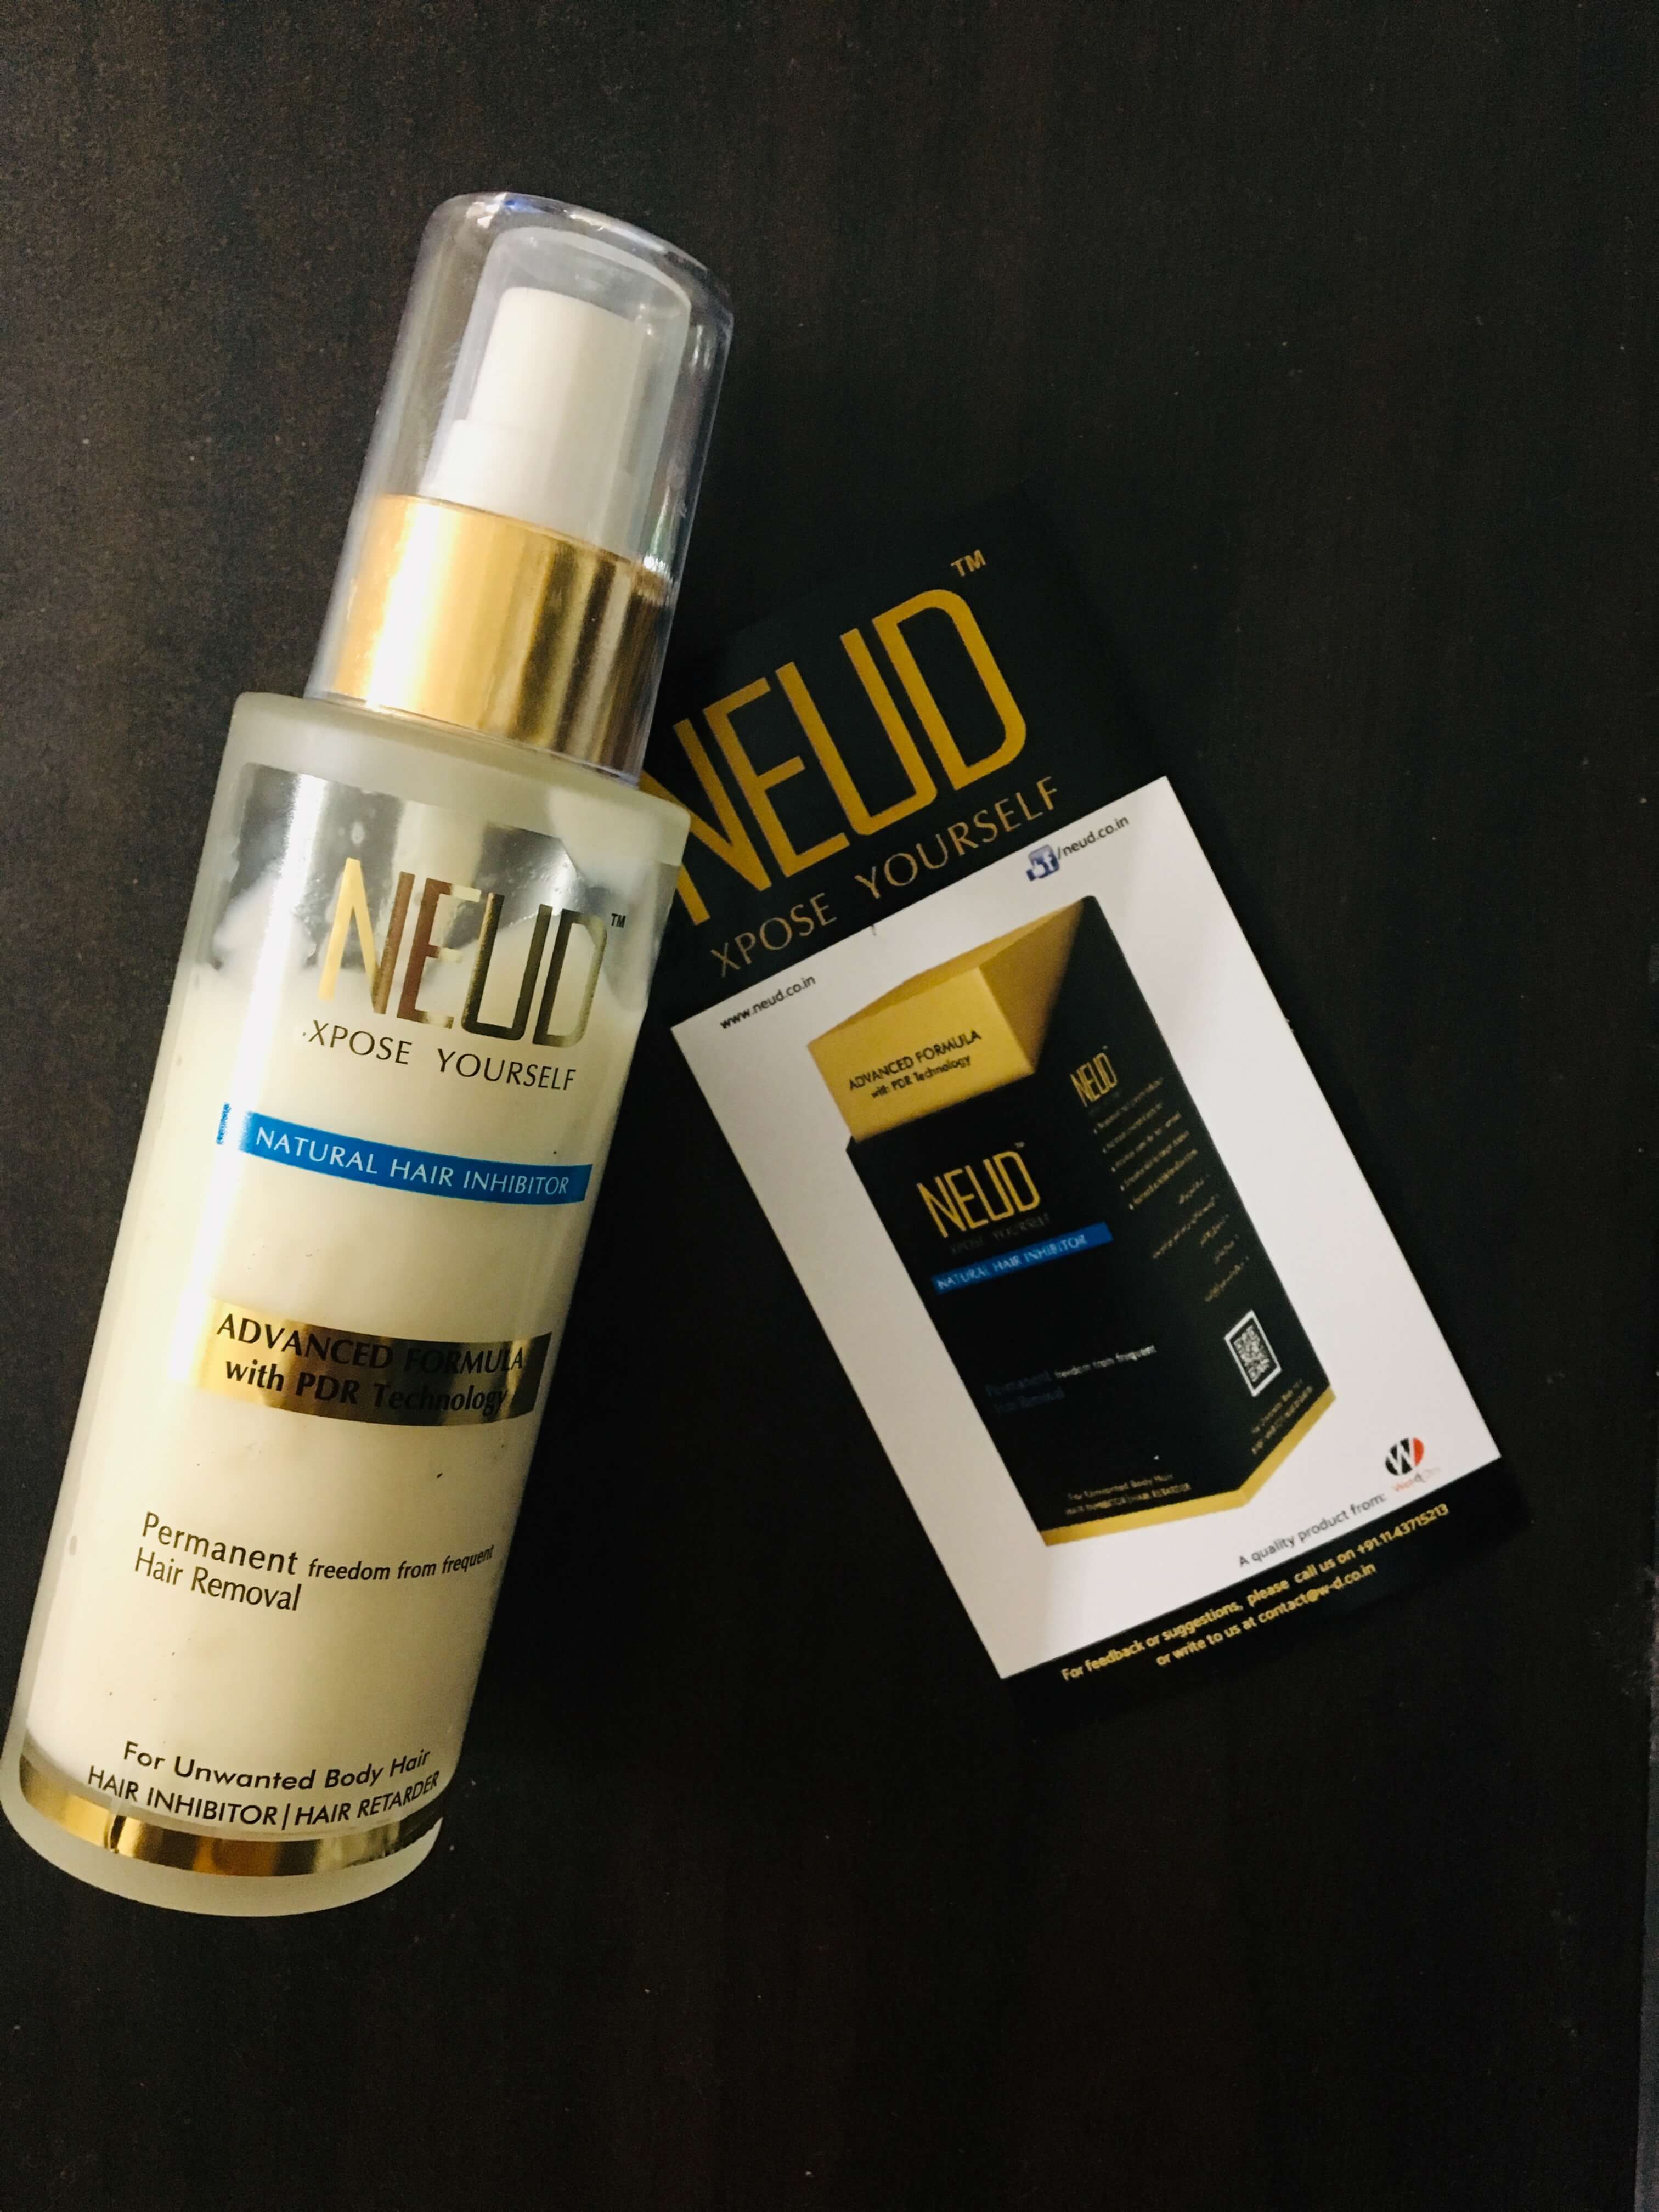 How to remove unwanted hair: NEUD Hair Inhibitor | GirlXplorer